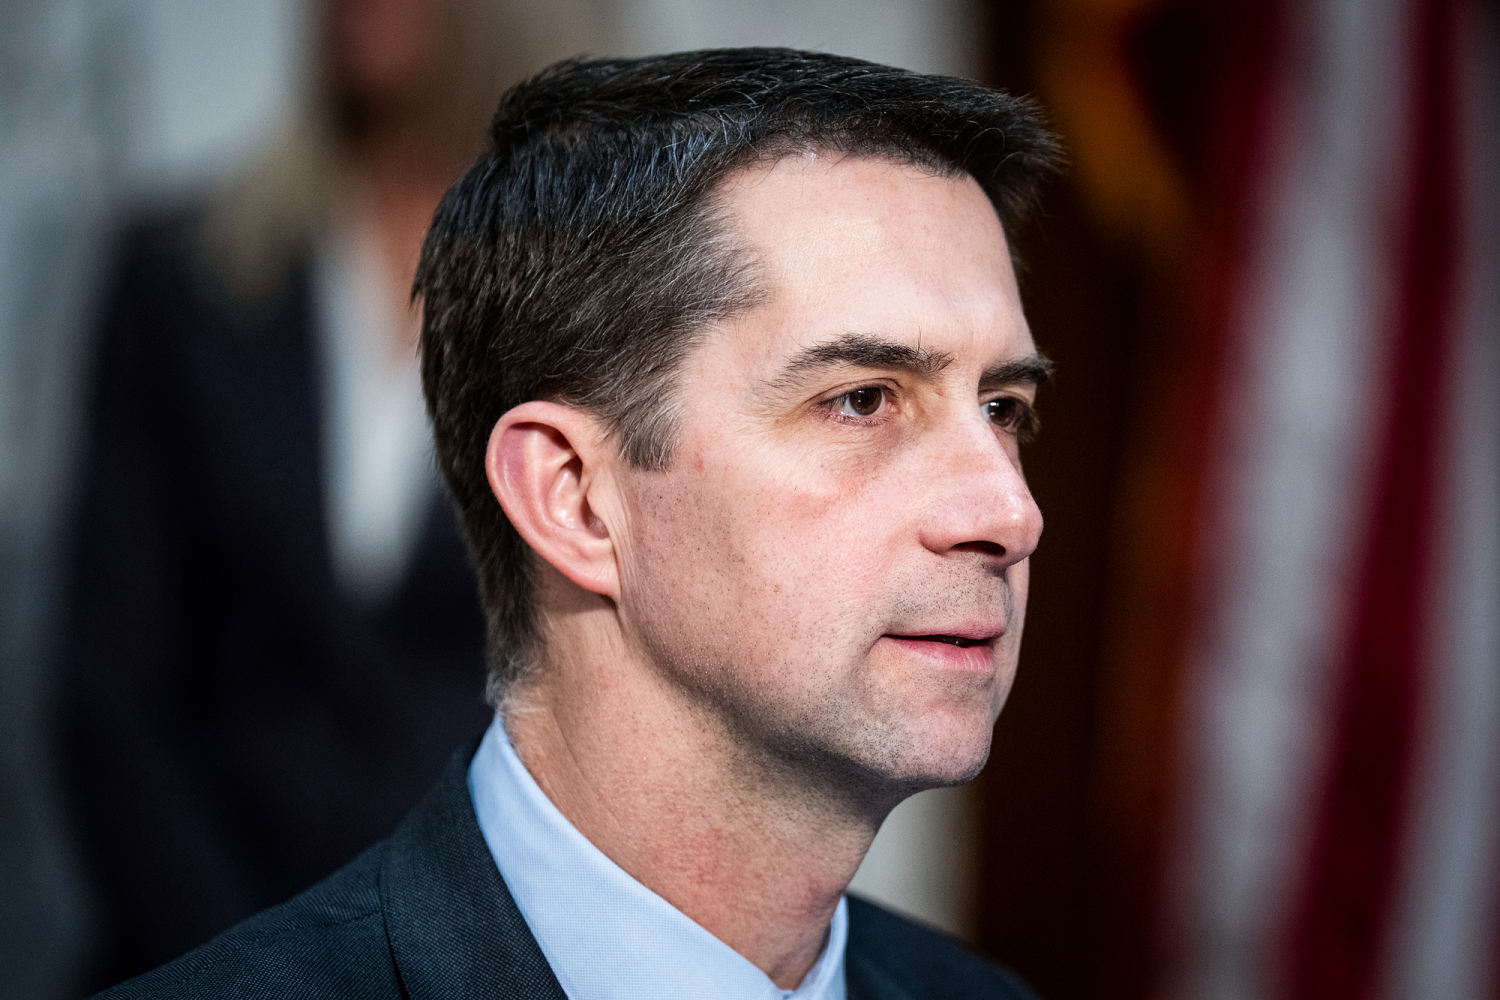 GOP Sen. Tom Cotton says he will accept 2024 election results